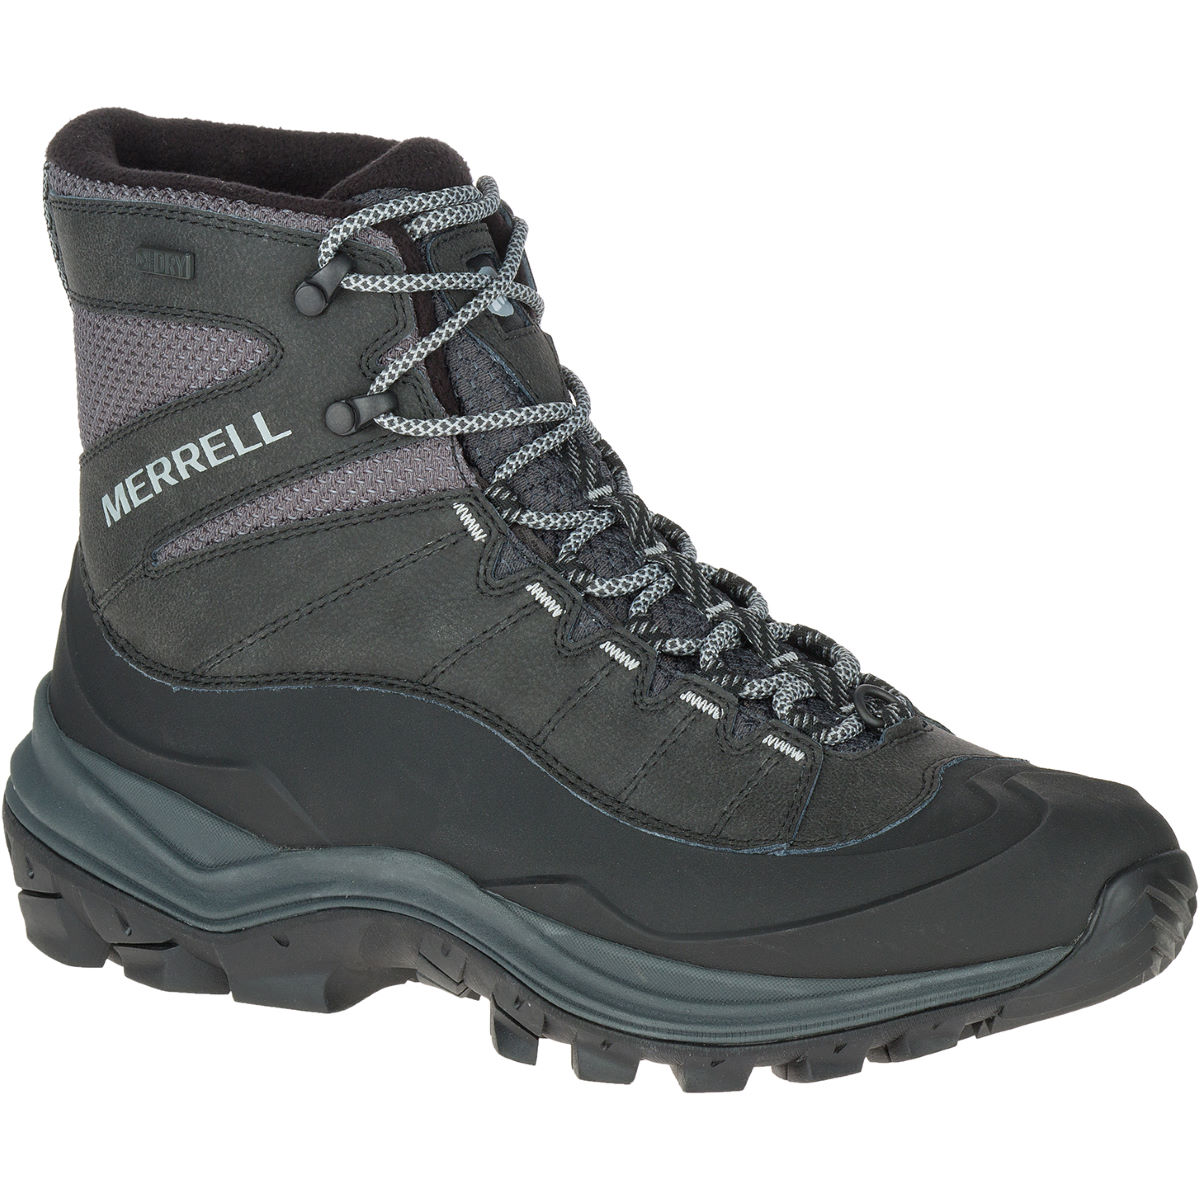 Merrell Thermo Chill 6 Shell Waterproof Boots - Botas y botines